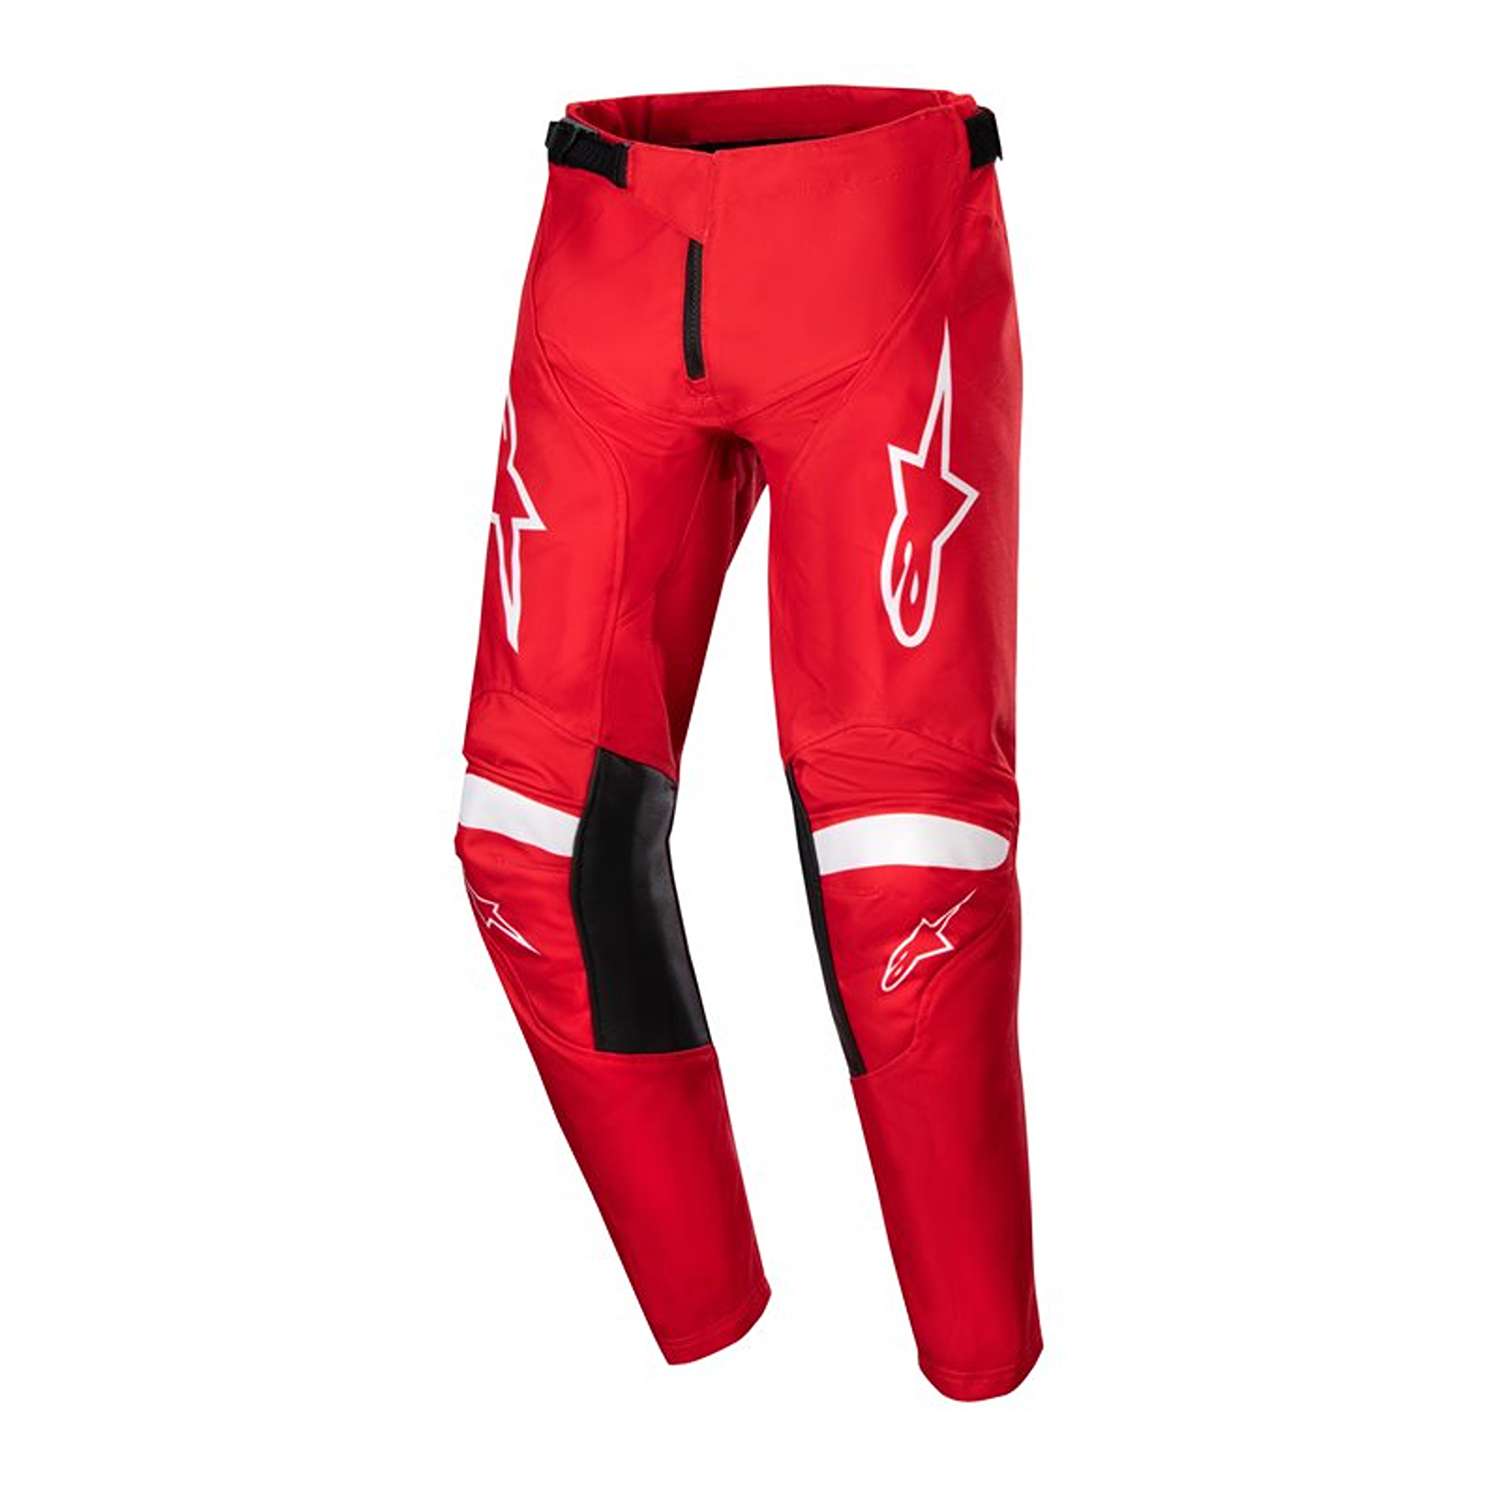 Image of Alpinestars Youth Racer Lurv Pants Mars Red White Size 24 ID 8059347267555